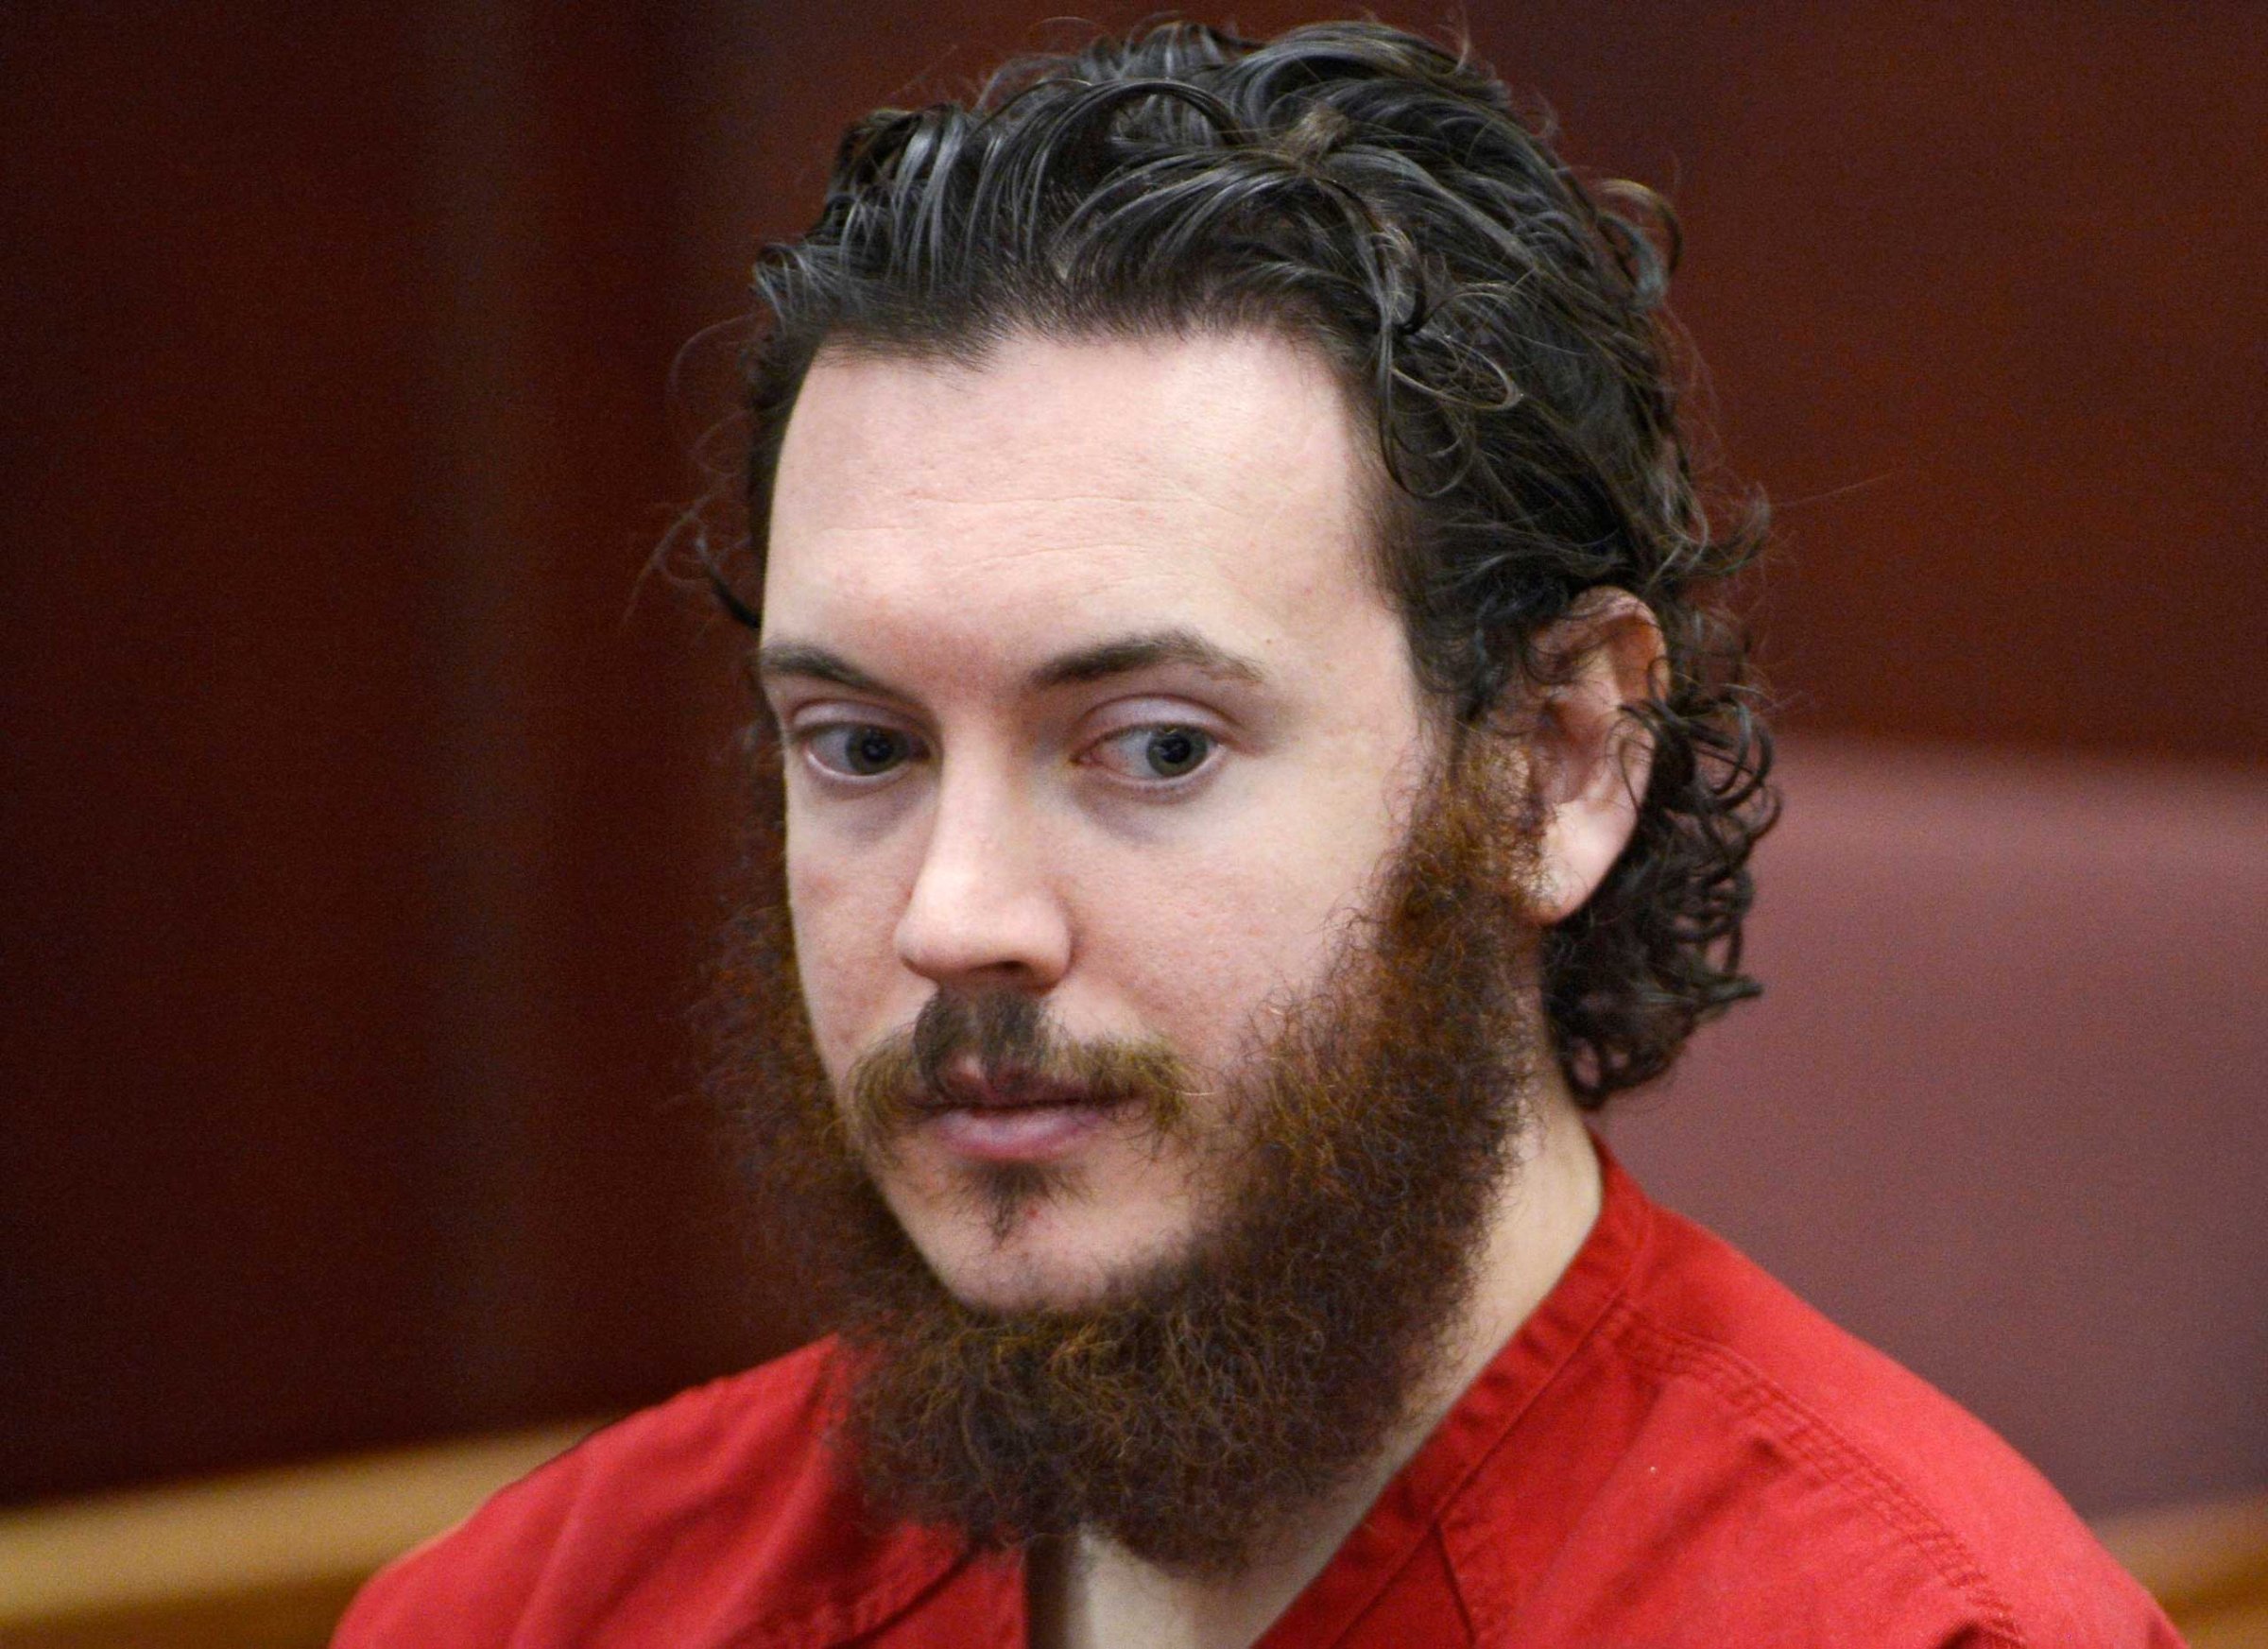 James Holmes sits in court for an advisement hearing at the Arapahoe County Justice Center in Centennial, Colo. on June 4, 2013.